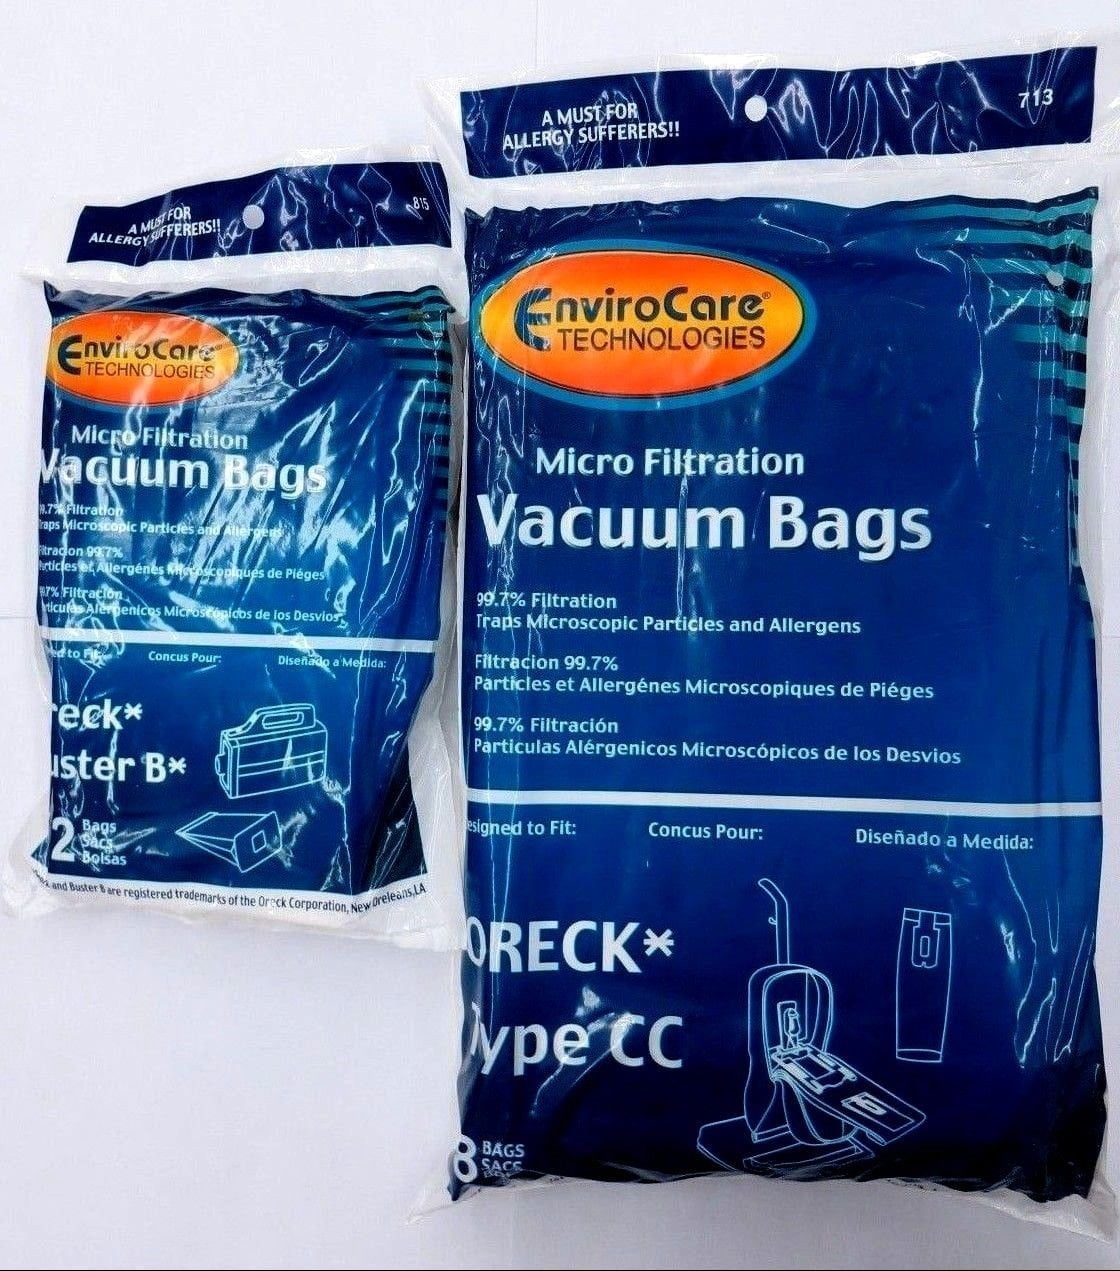 EnviroCare Oreck Upright Micro Filtration Type CC Paper Bag 8 in Pack Part 713 